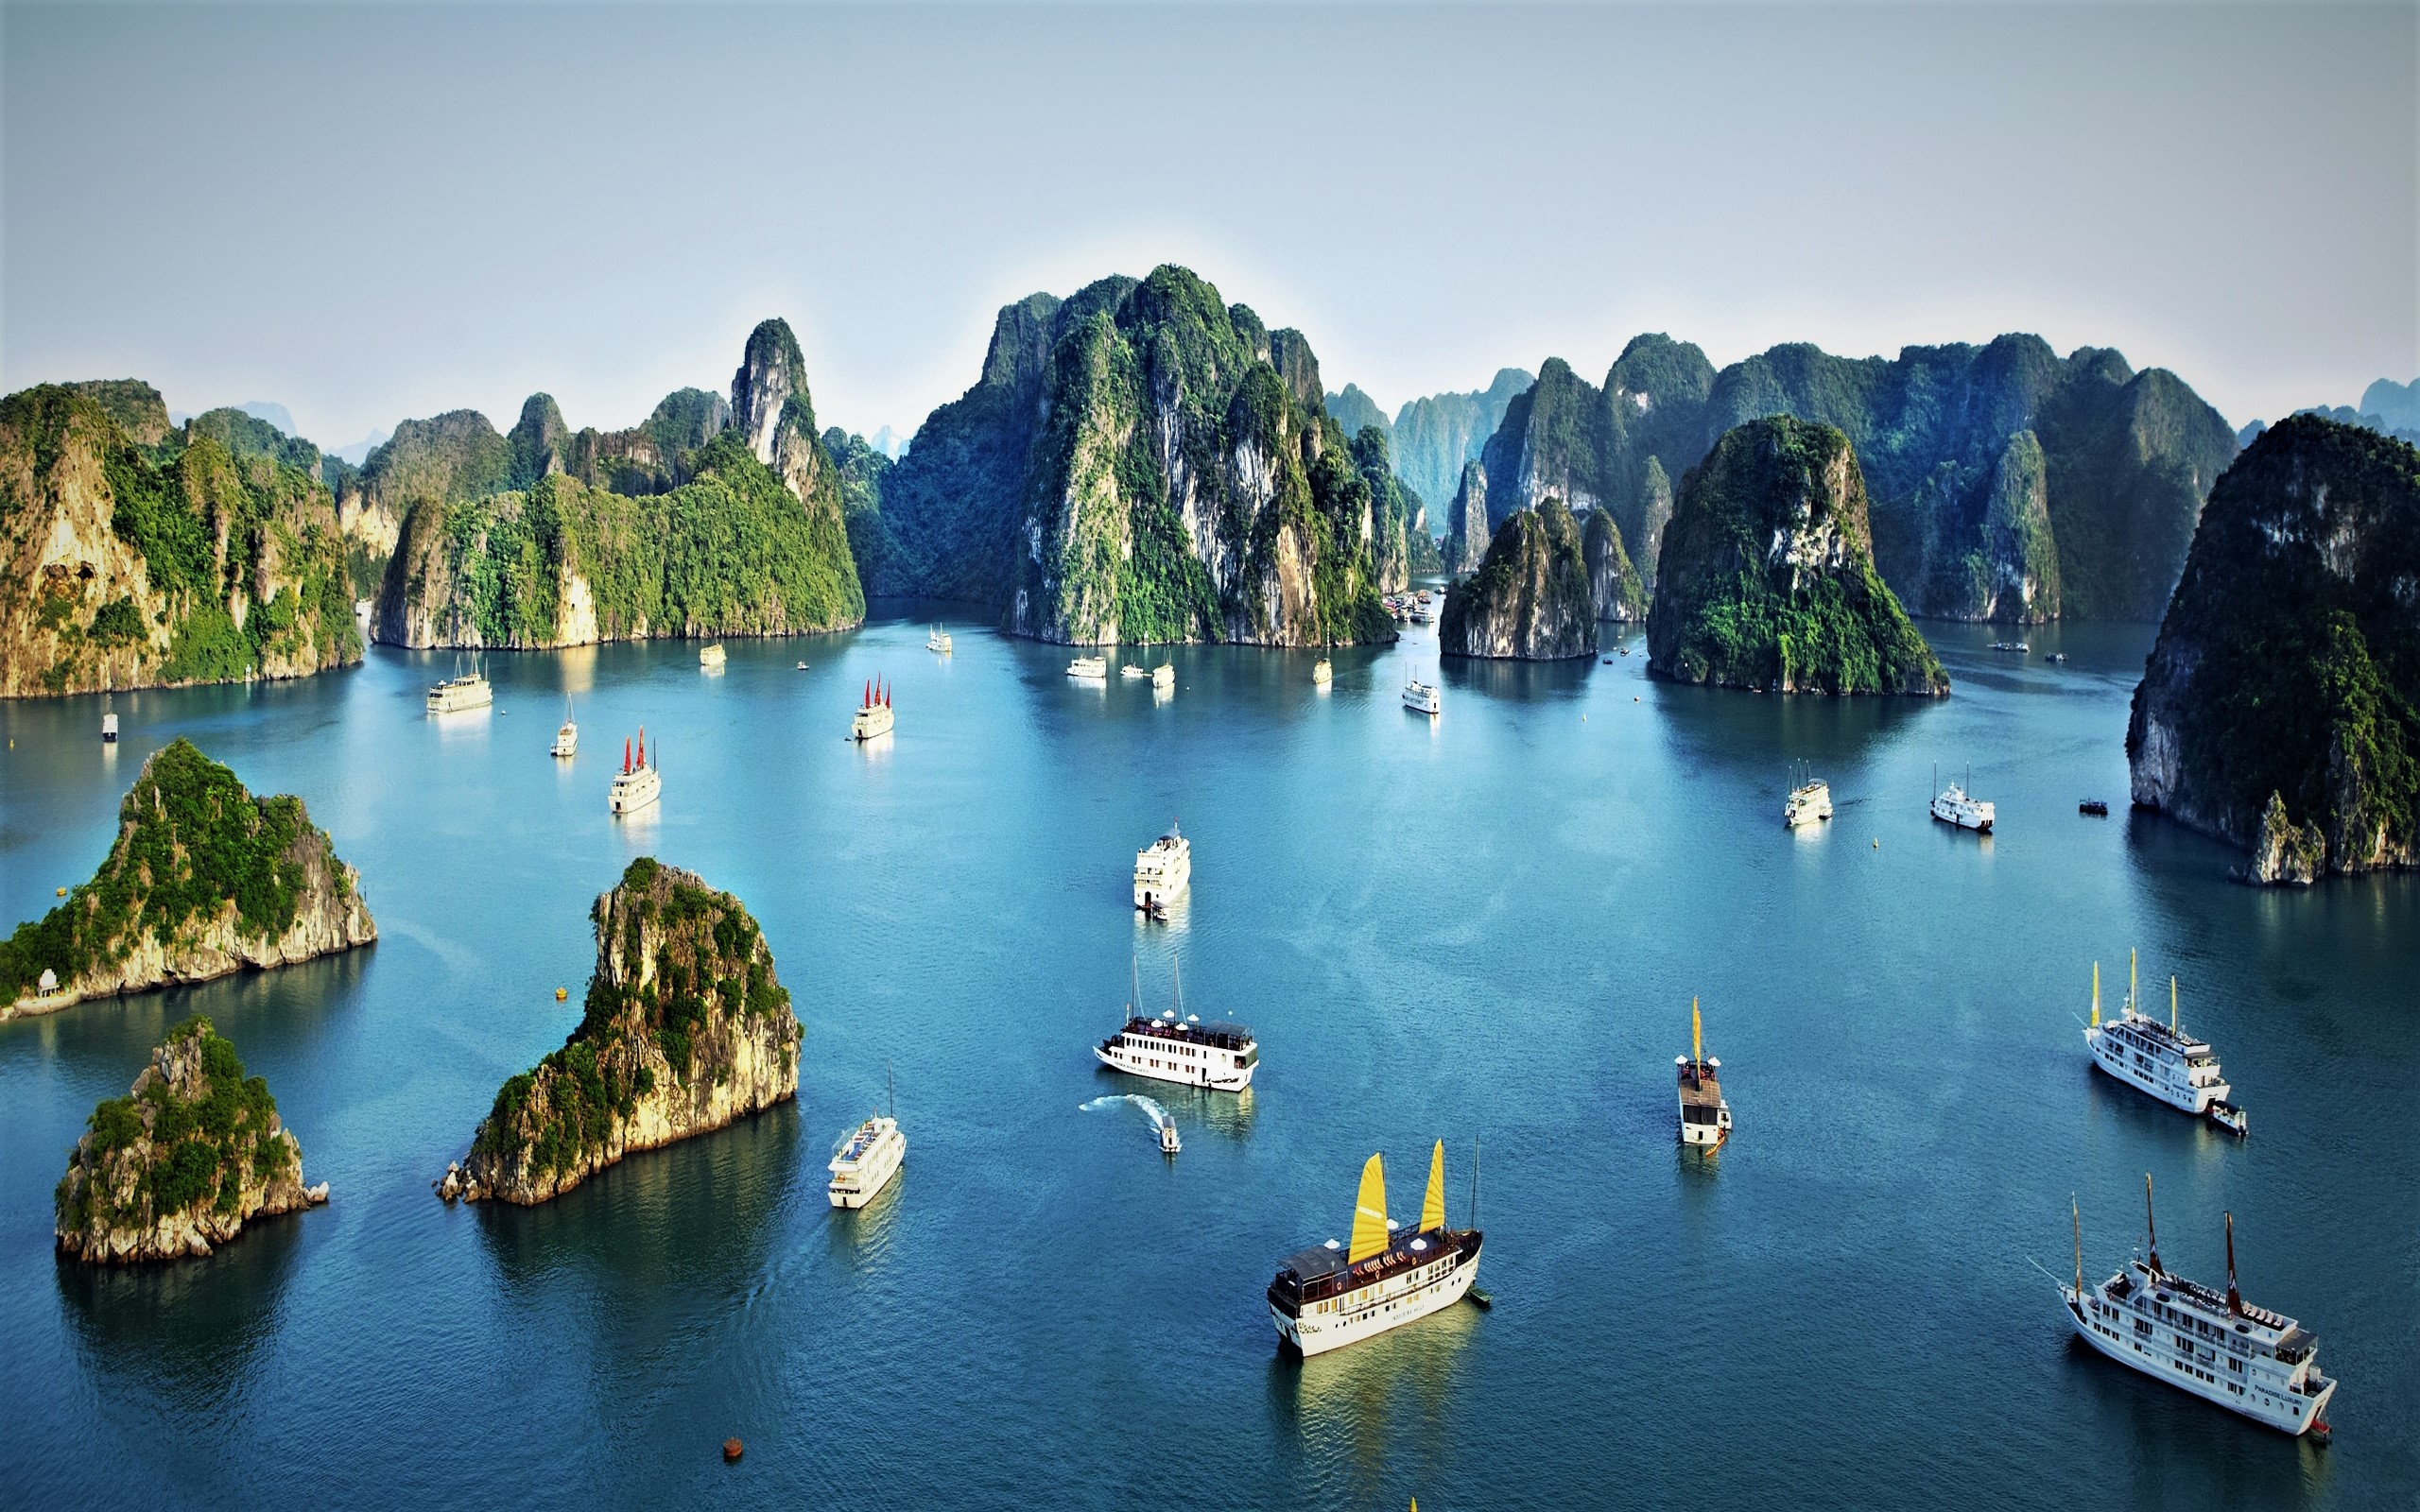 Experience the natural wonders and unique sights of Vietnam's most celebrated destination